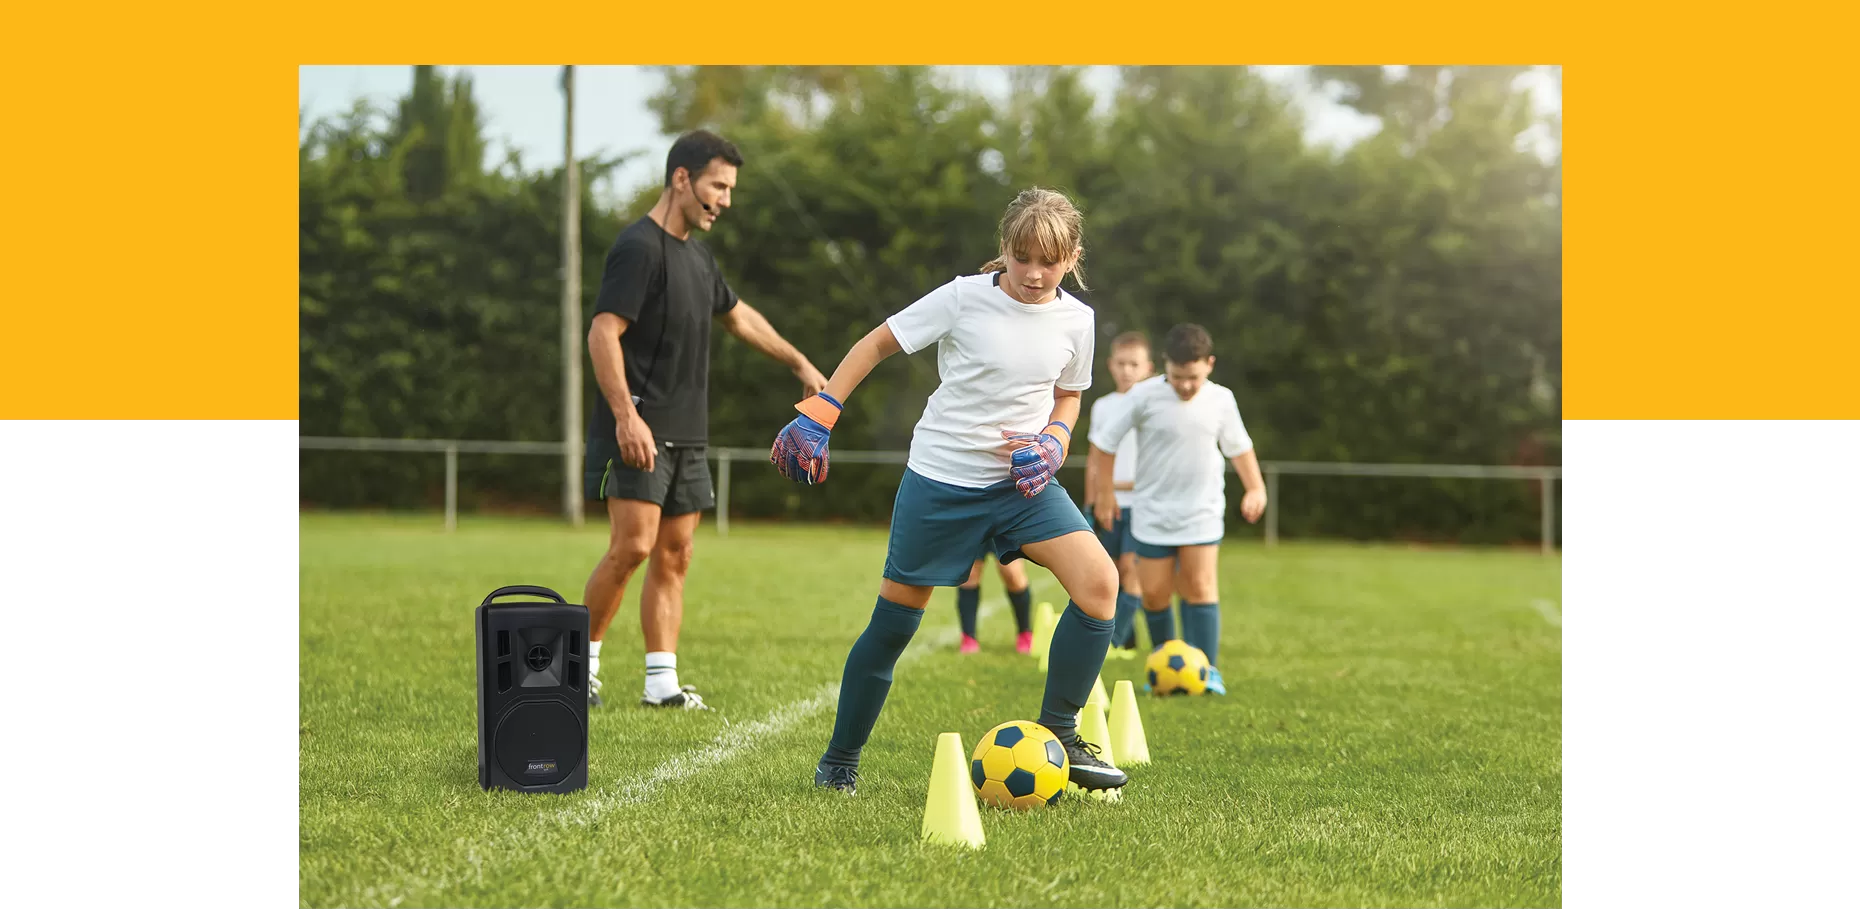 Outdoor sports class using a lyrik speaker. Yellow banner at top behind image